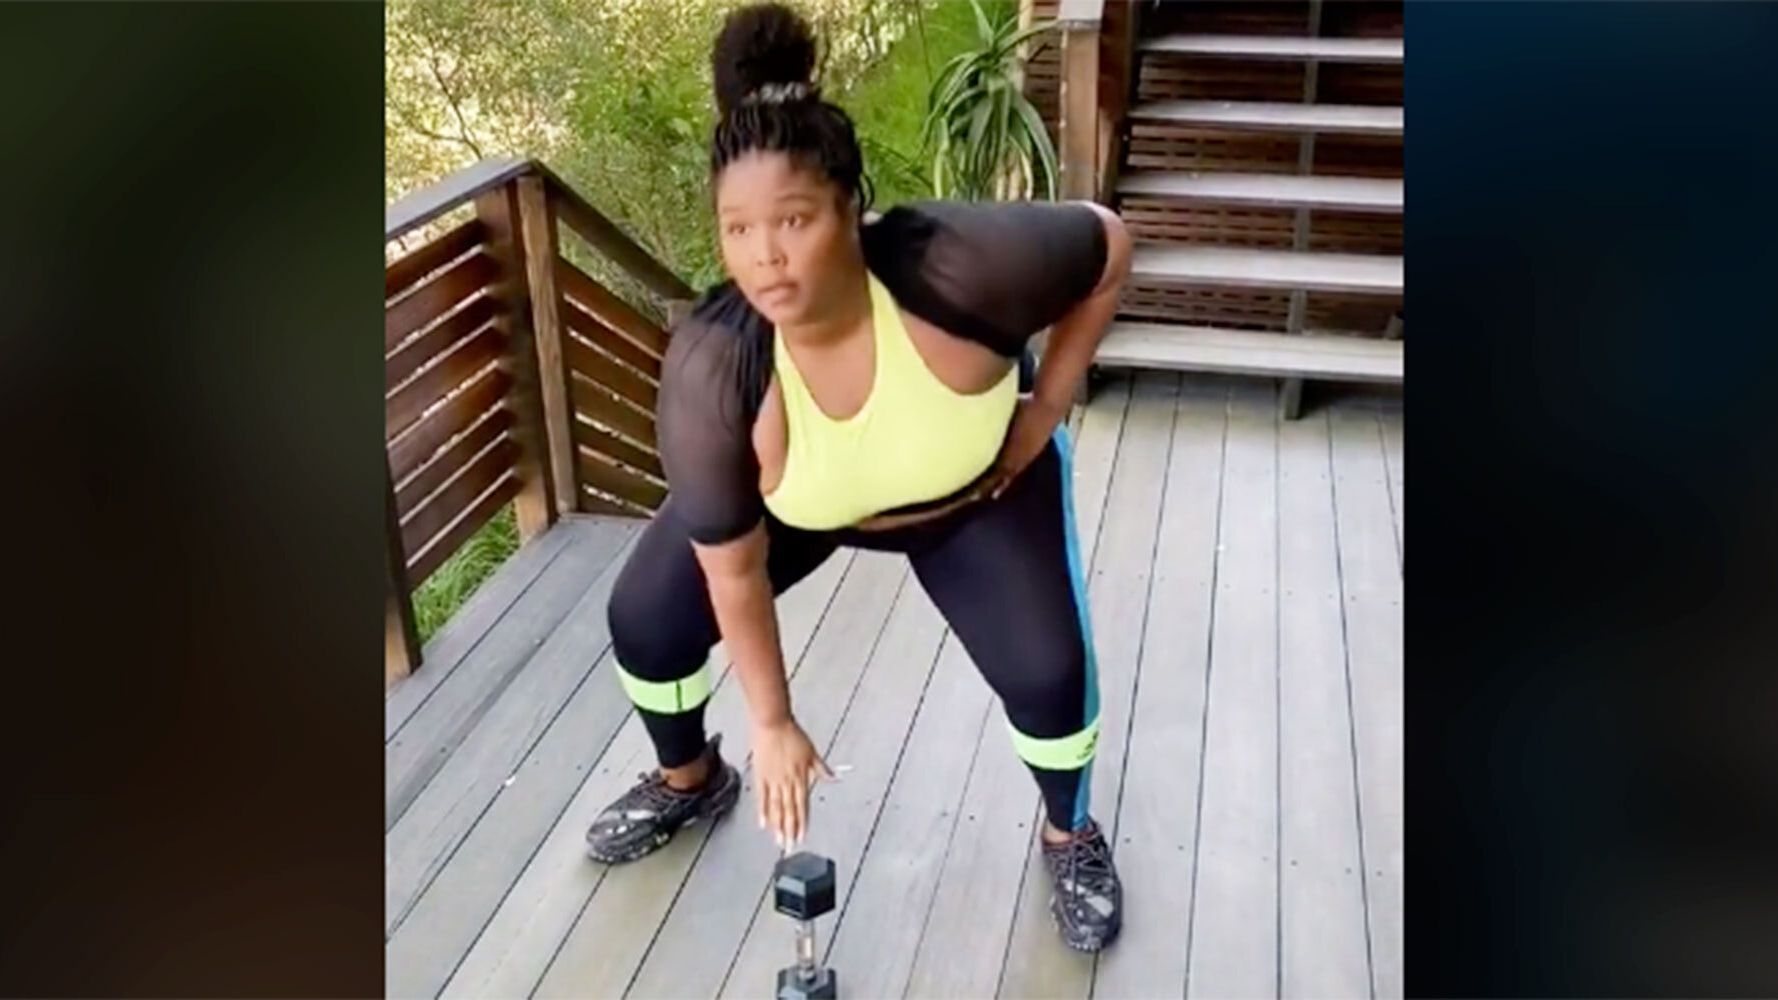 Lizzo's Workout TikTok Video Is Meant For 'Fat Shamers' To See